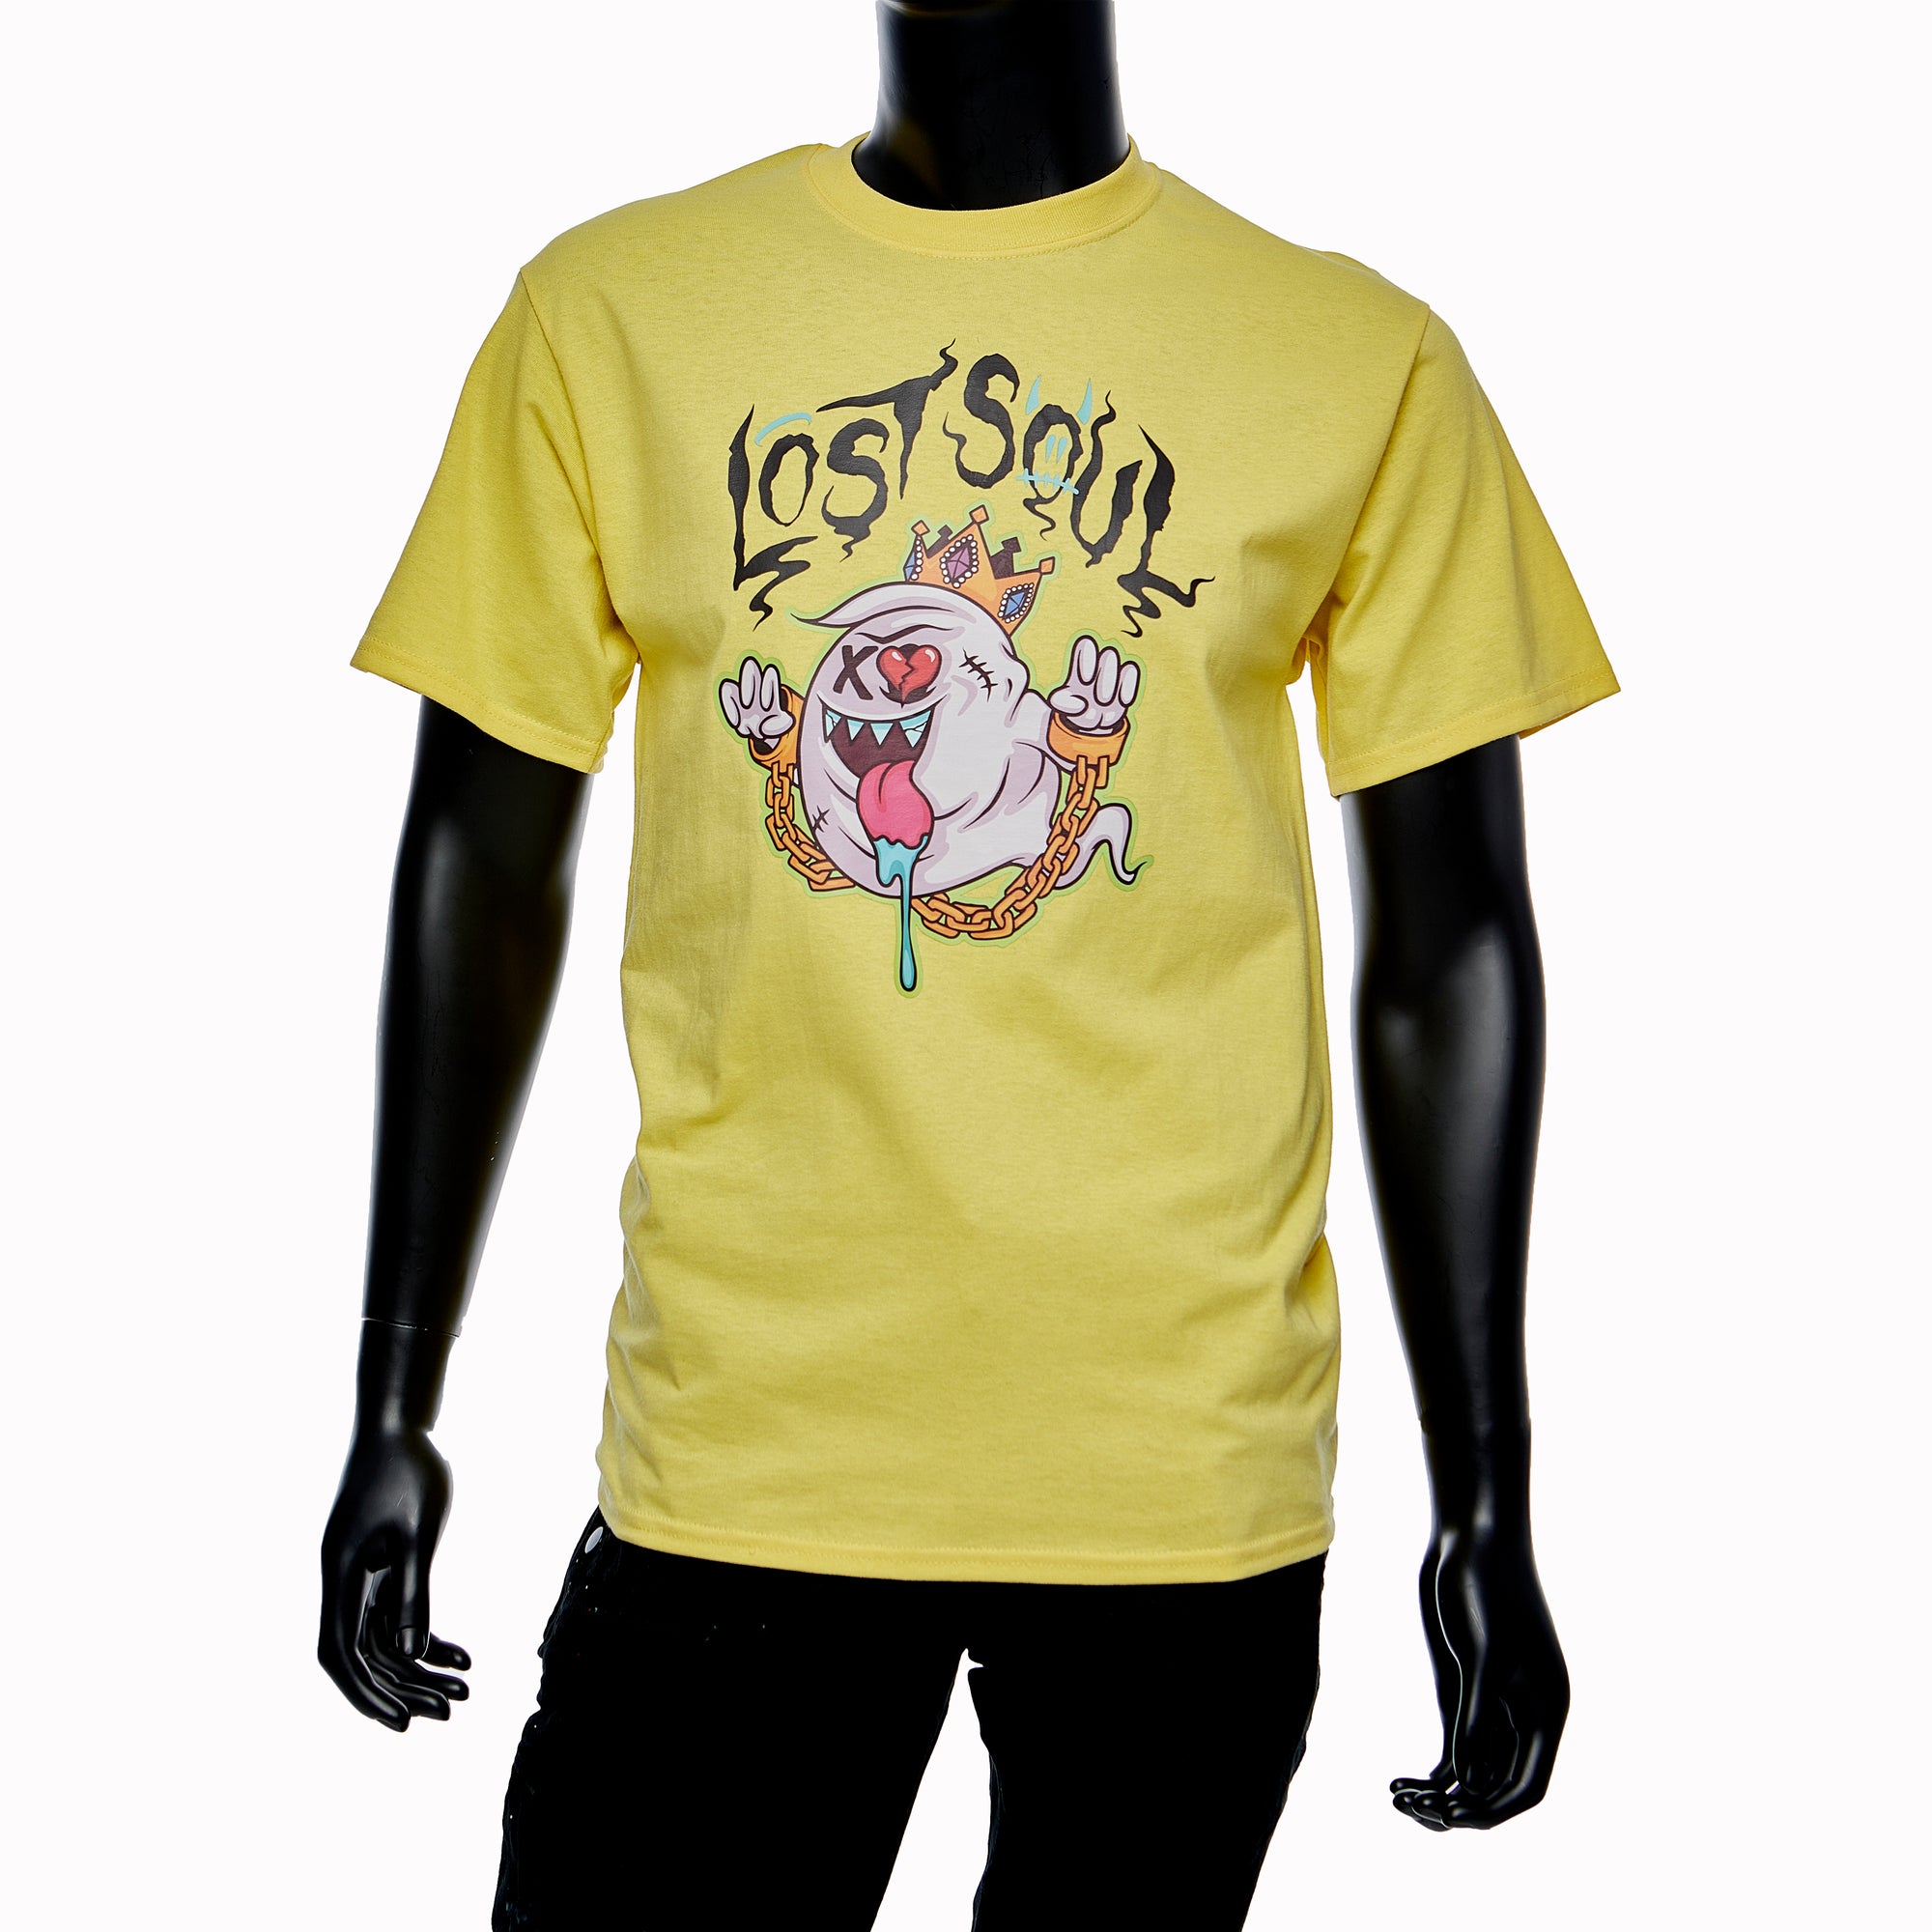 Lost Soul Tee (Yellow)